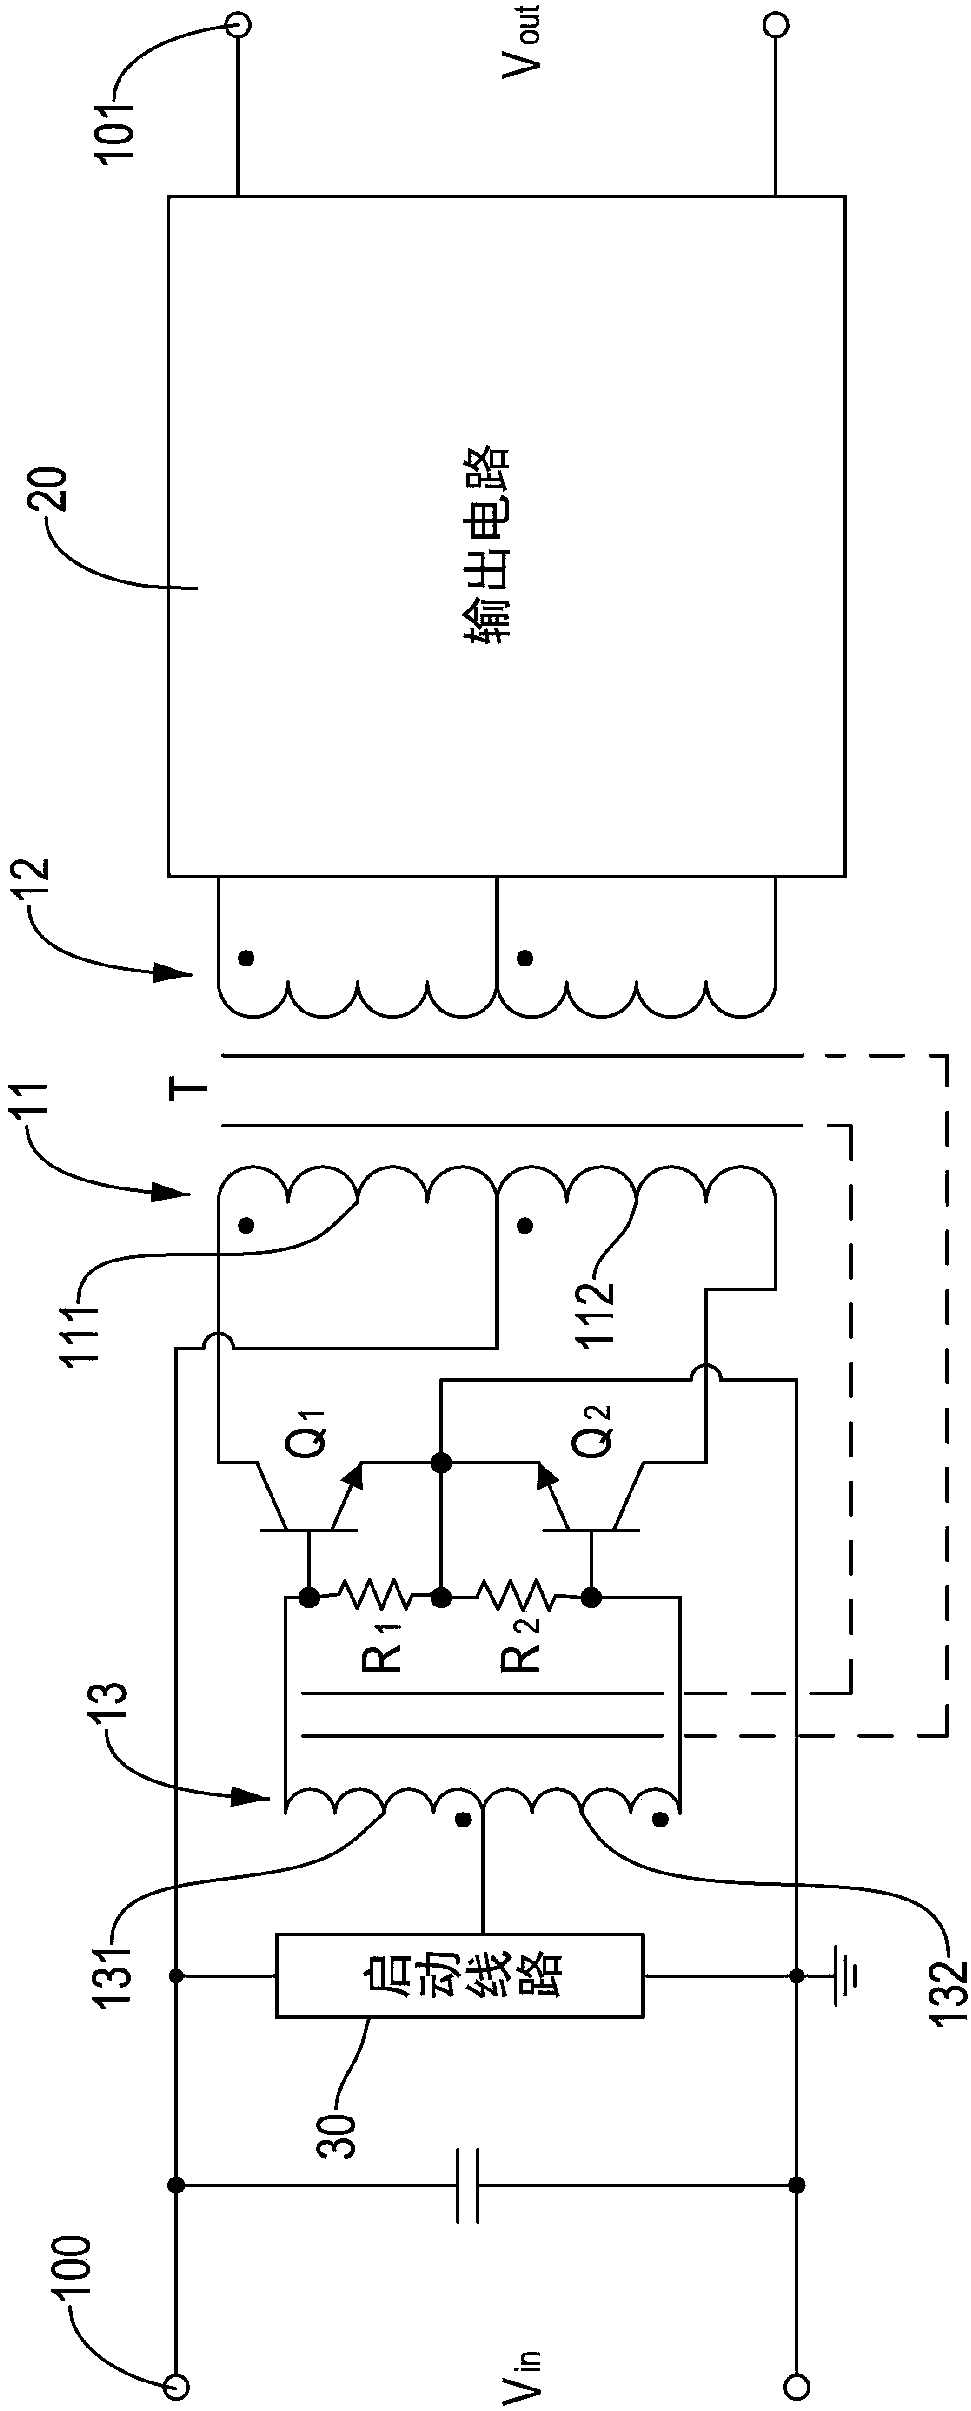 Self-excited push-pull conversion circuit